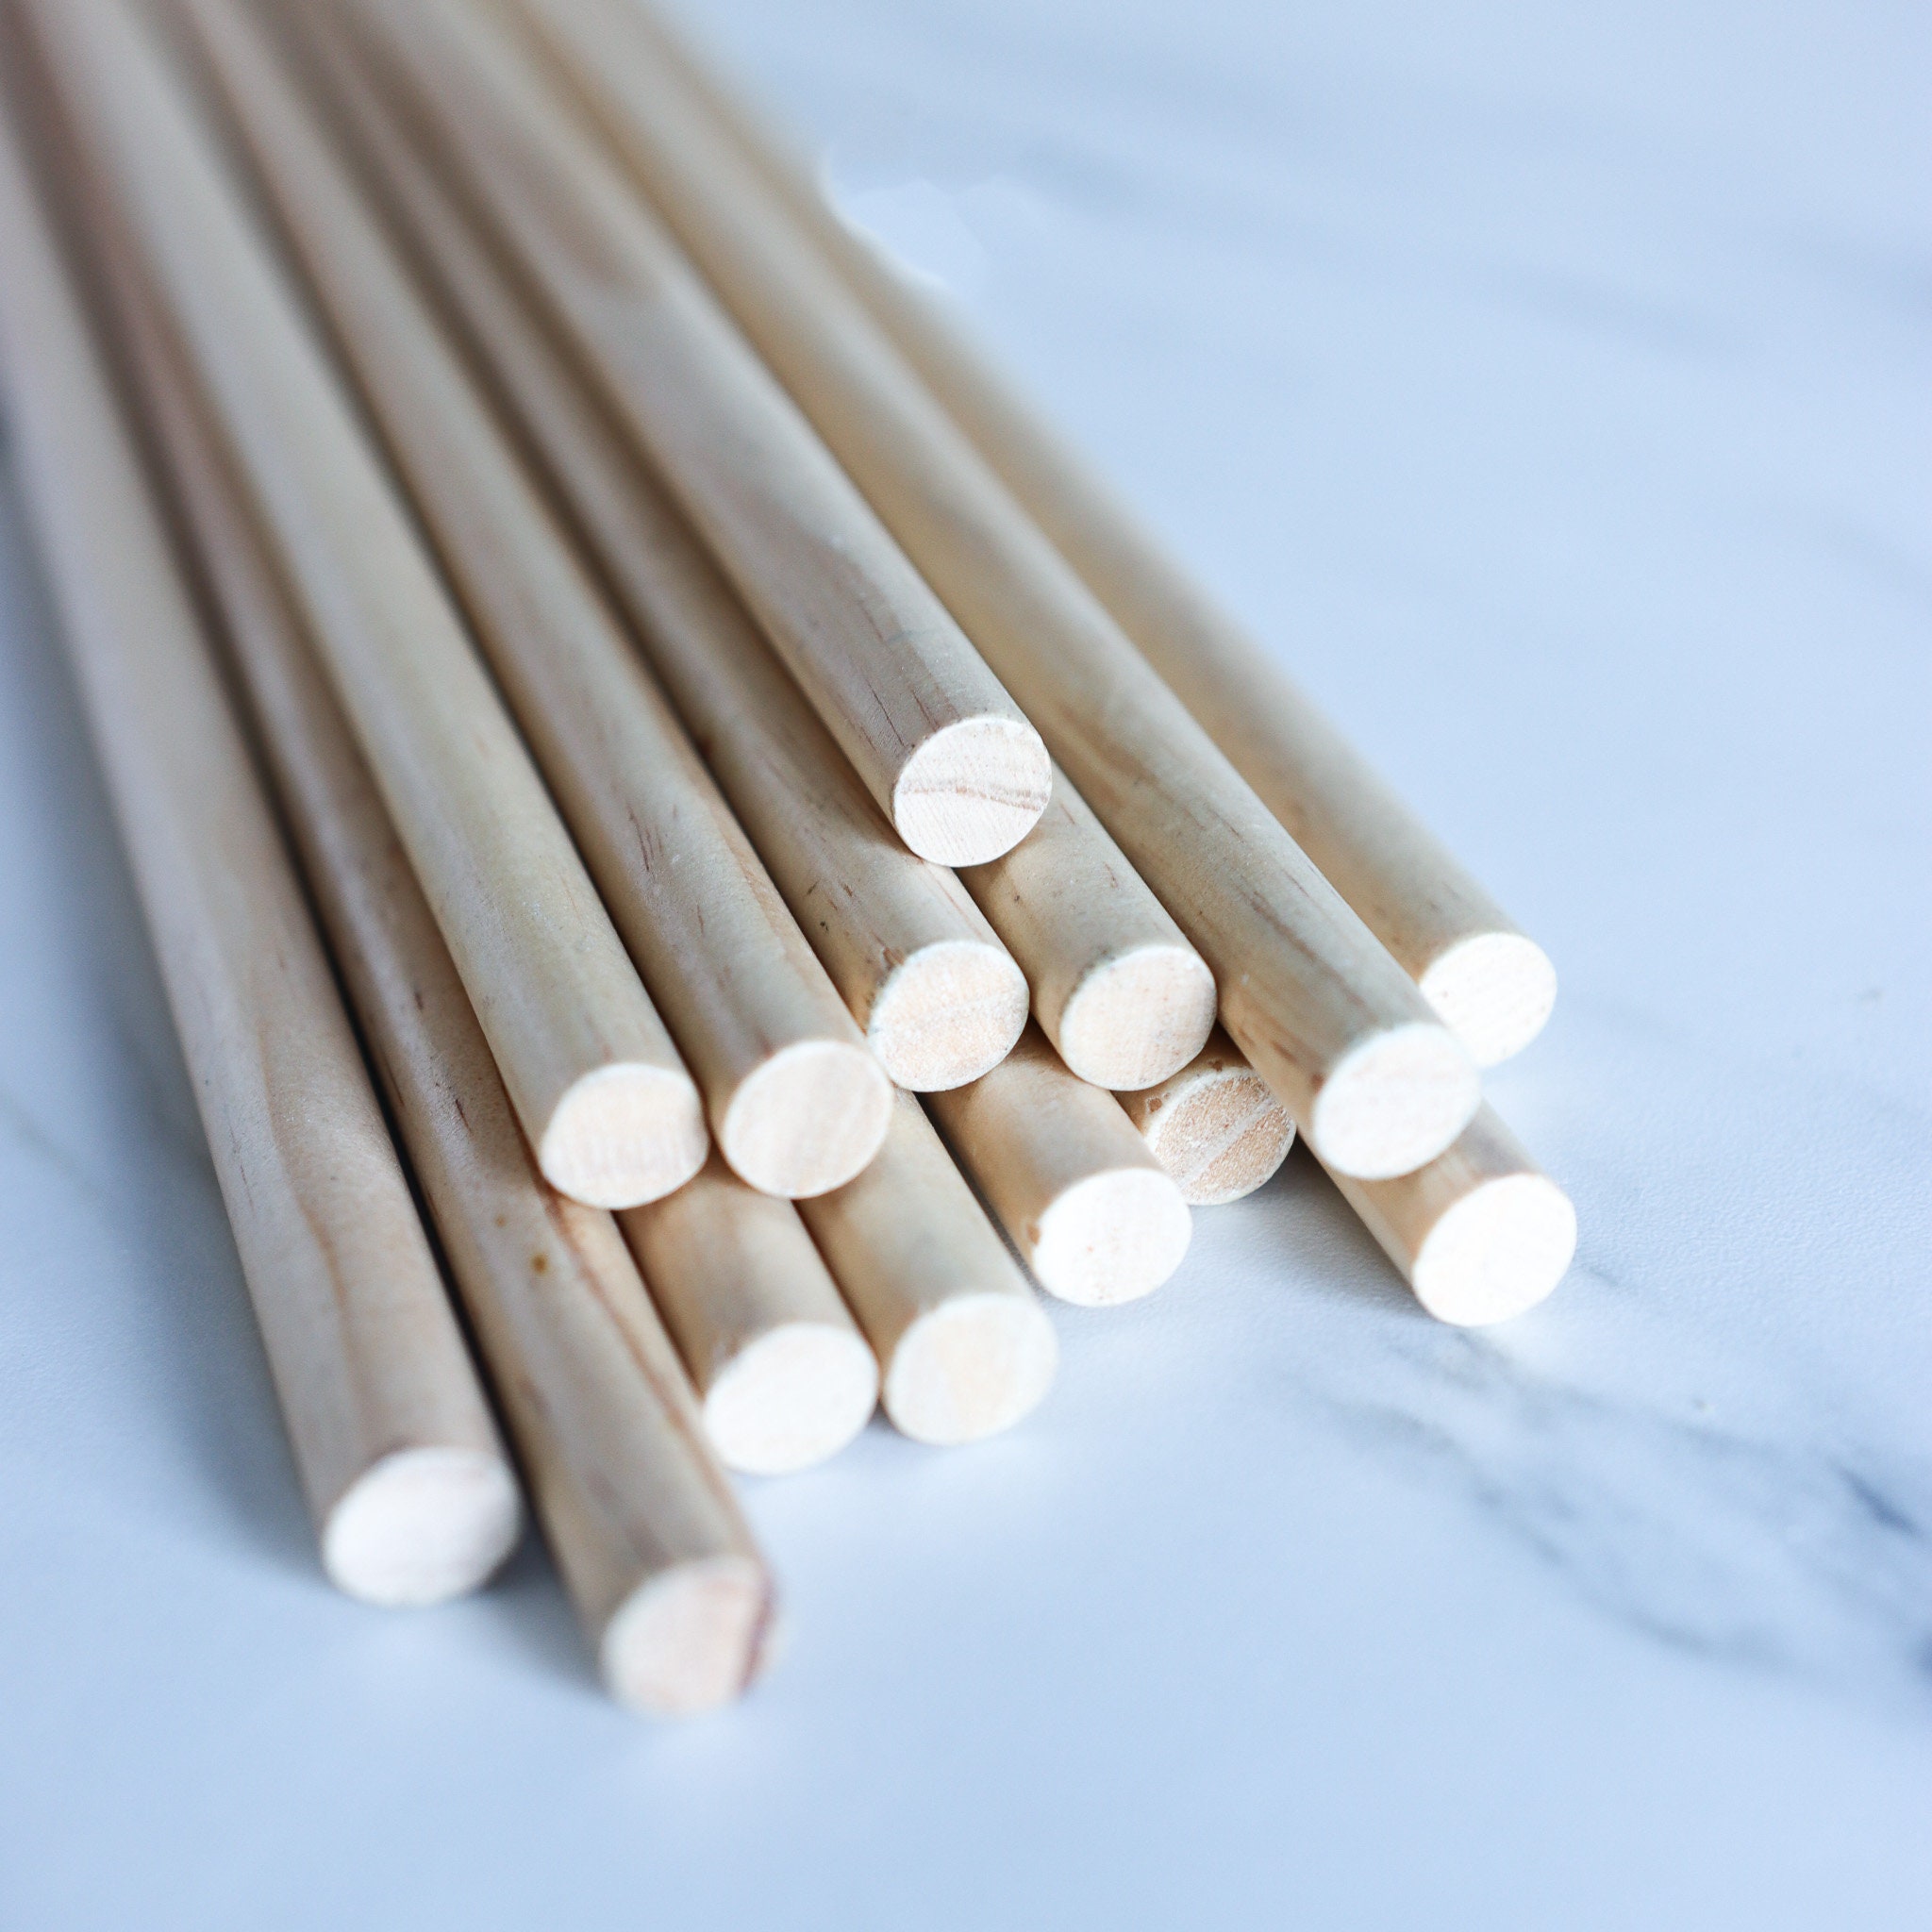 Easy Bake Supplies on Instagram: 3 Piece White Plastic Dowels One set  contain 3 pieces plastic dowel rods, Choose how many to use according to  your needs, perfect for stacking tiered cakes.